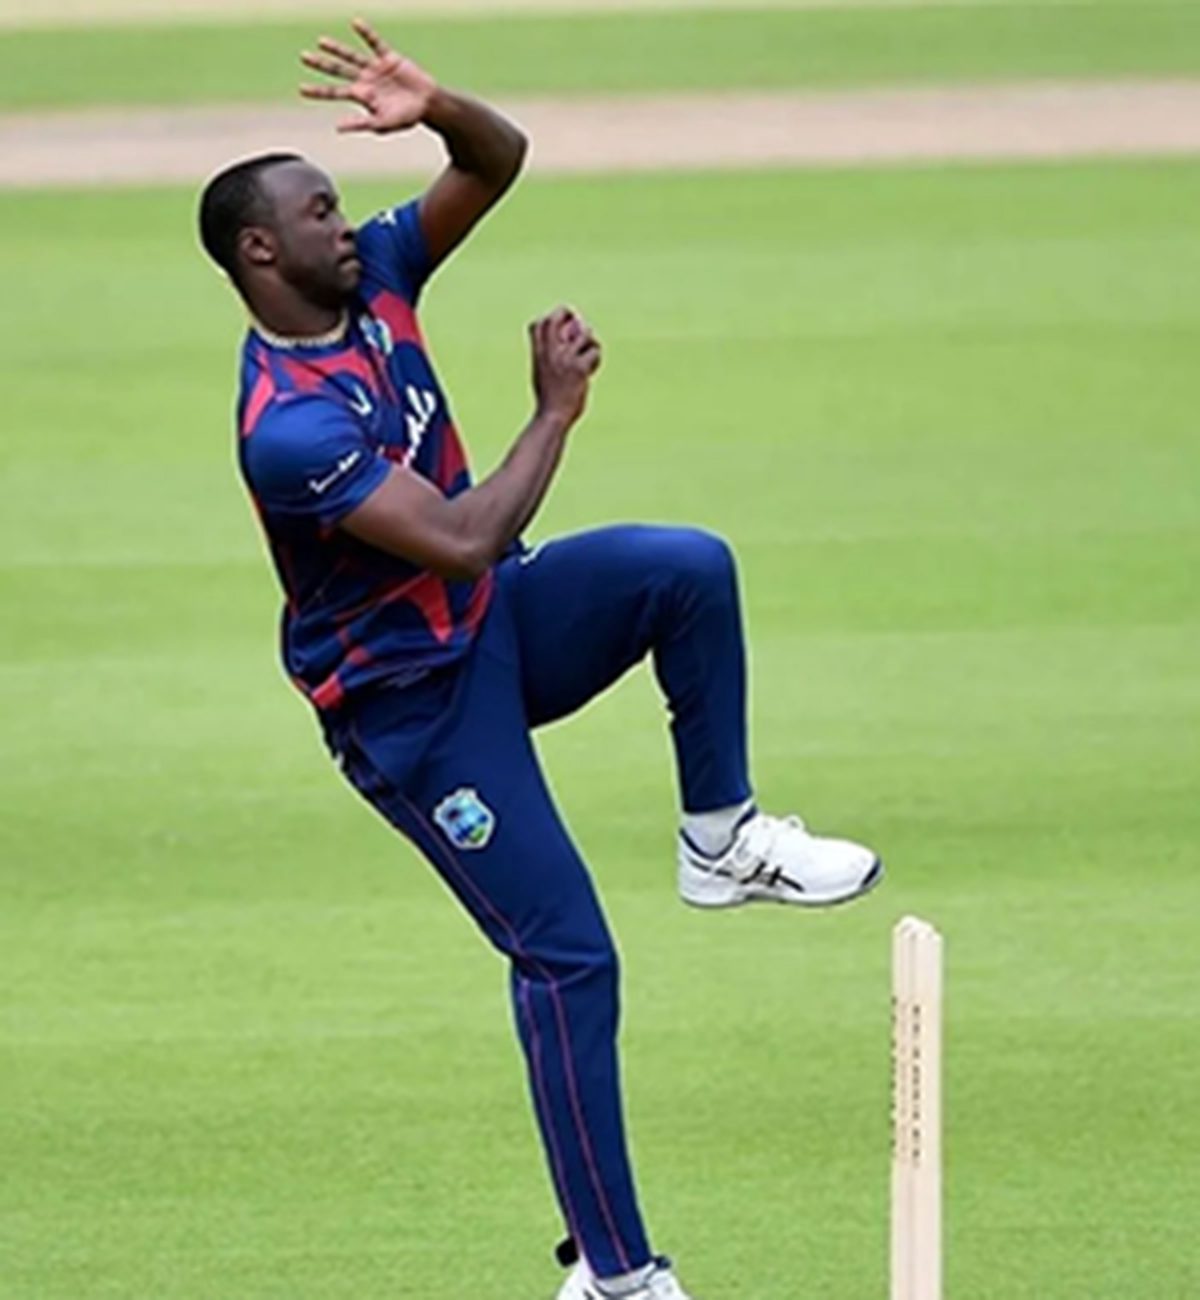 Seamer Kemar Roach celebrates after removing captain Rohit Sharma in the second ODI yesterday.